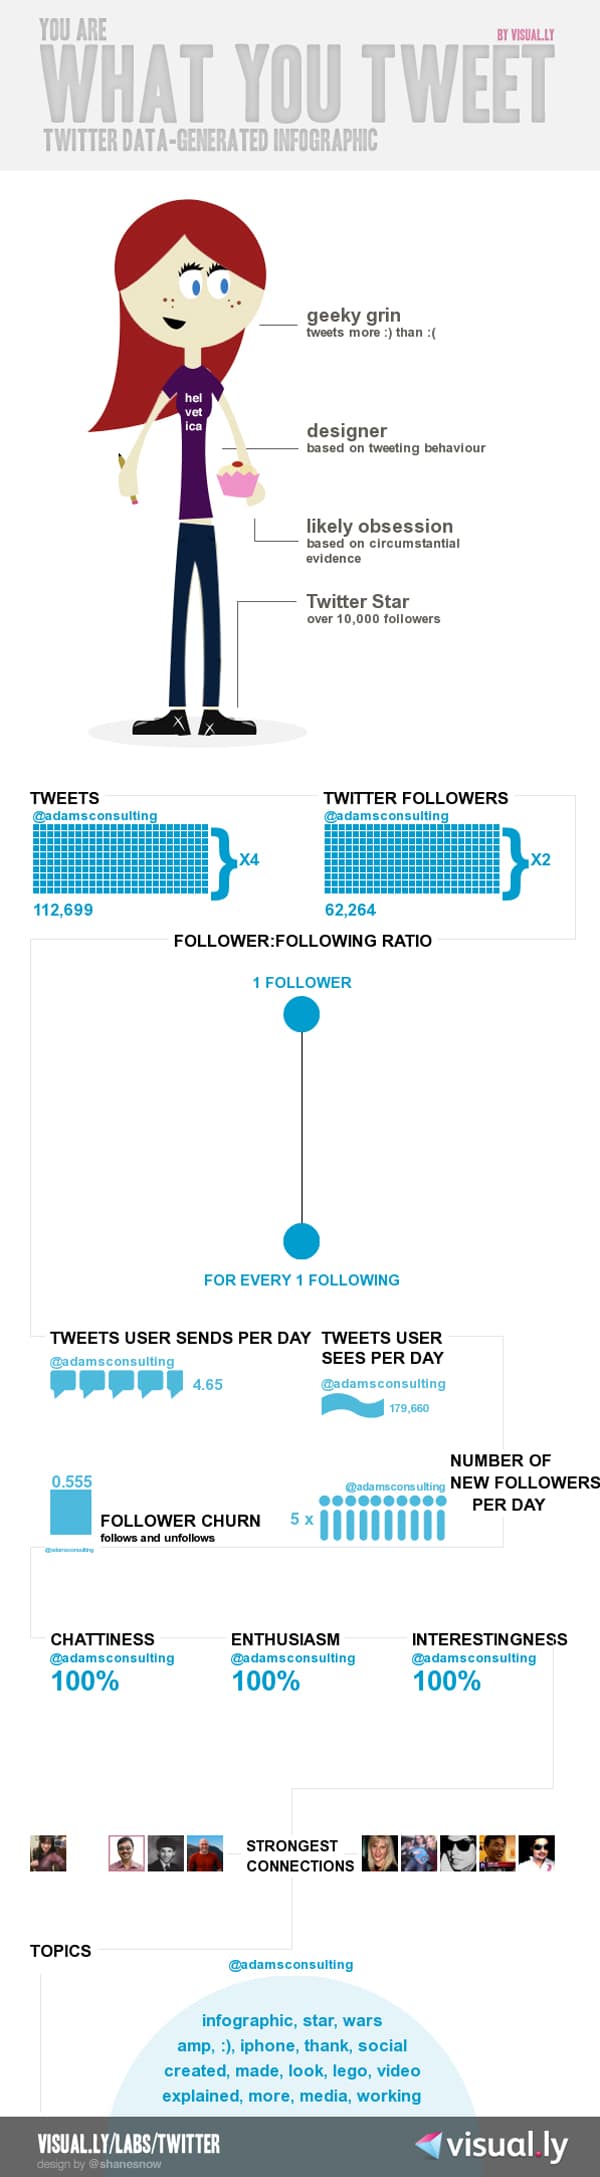 You-Are-What-Tweet-Infographic